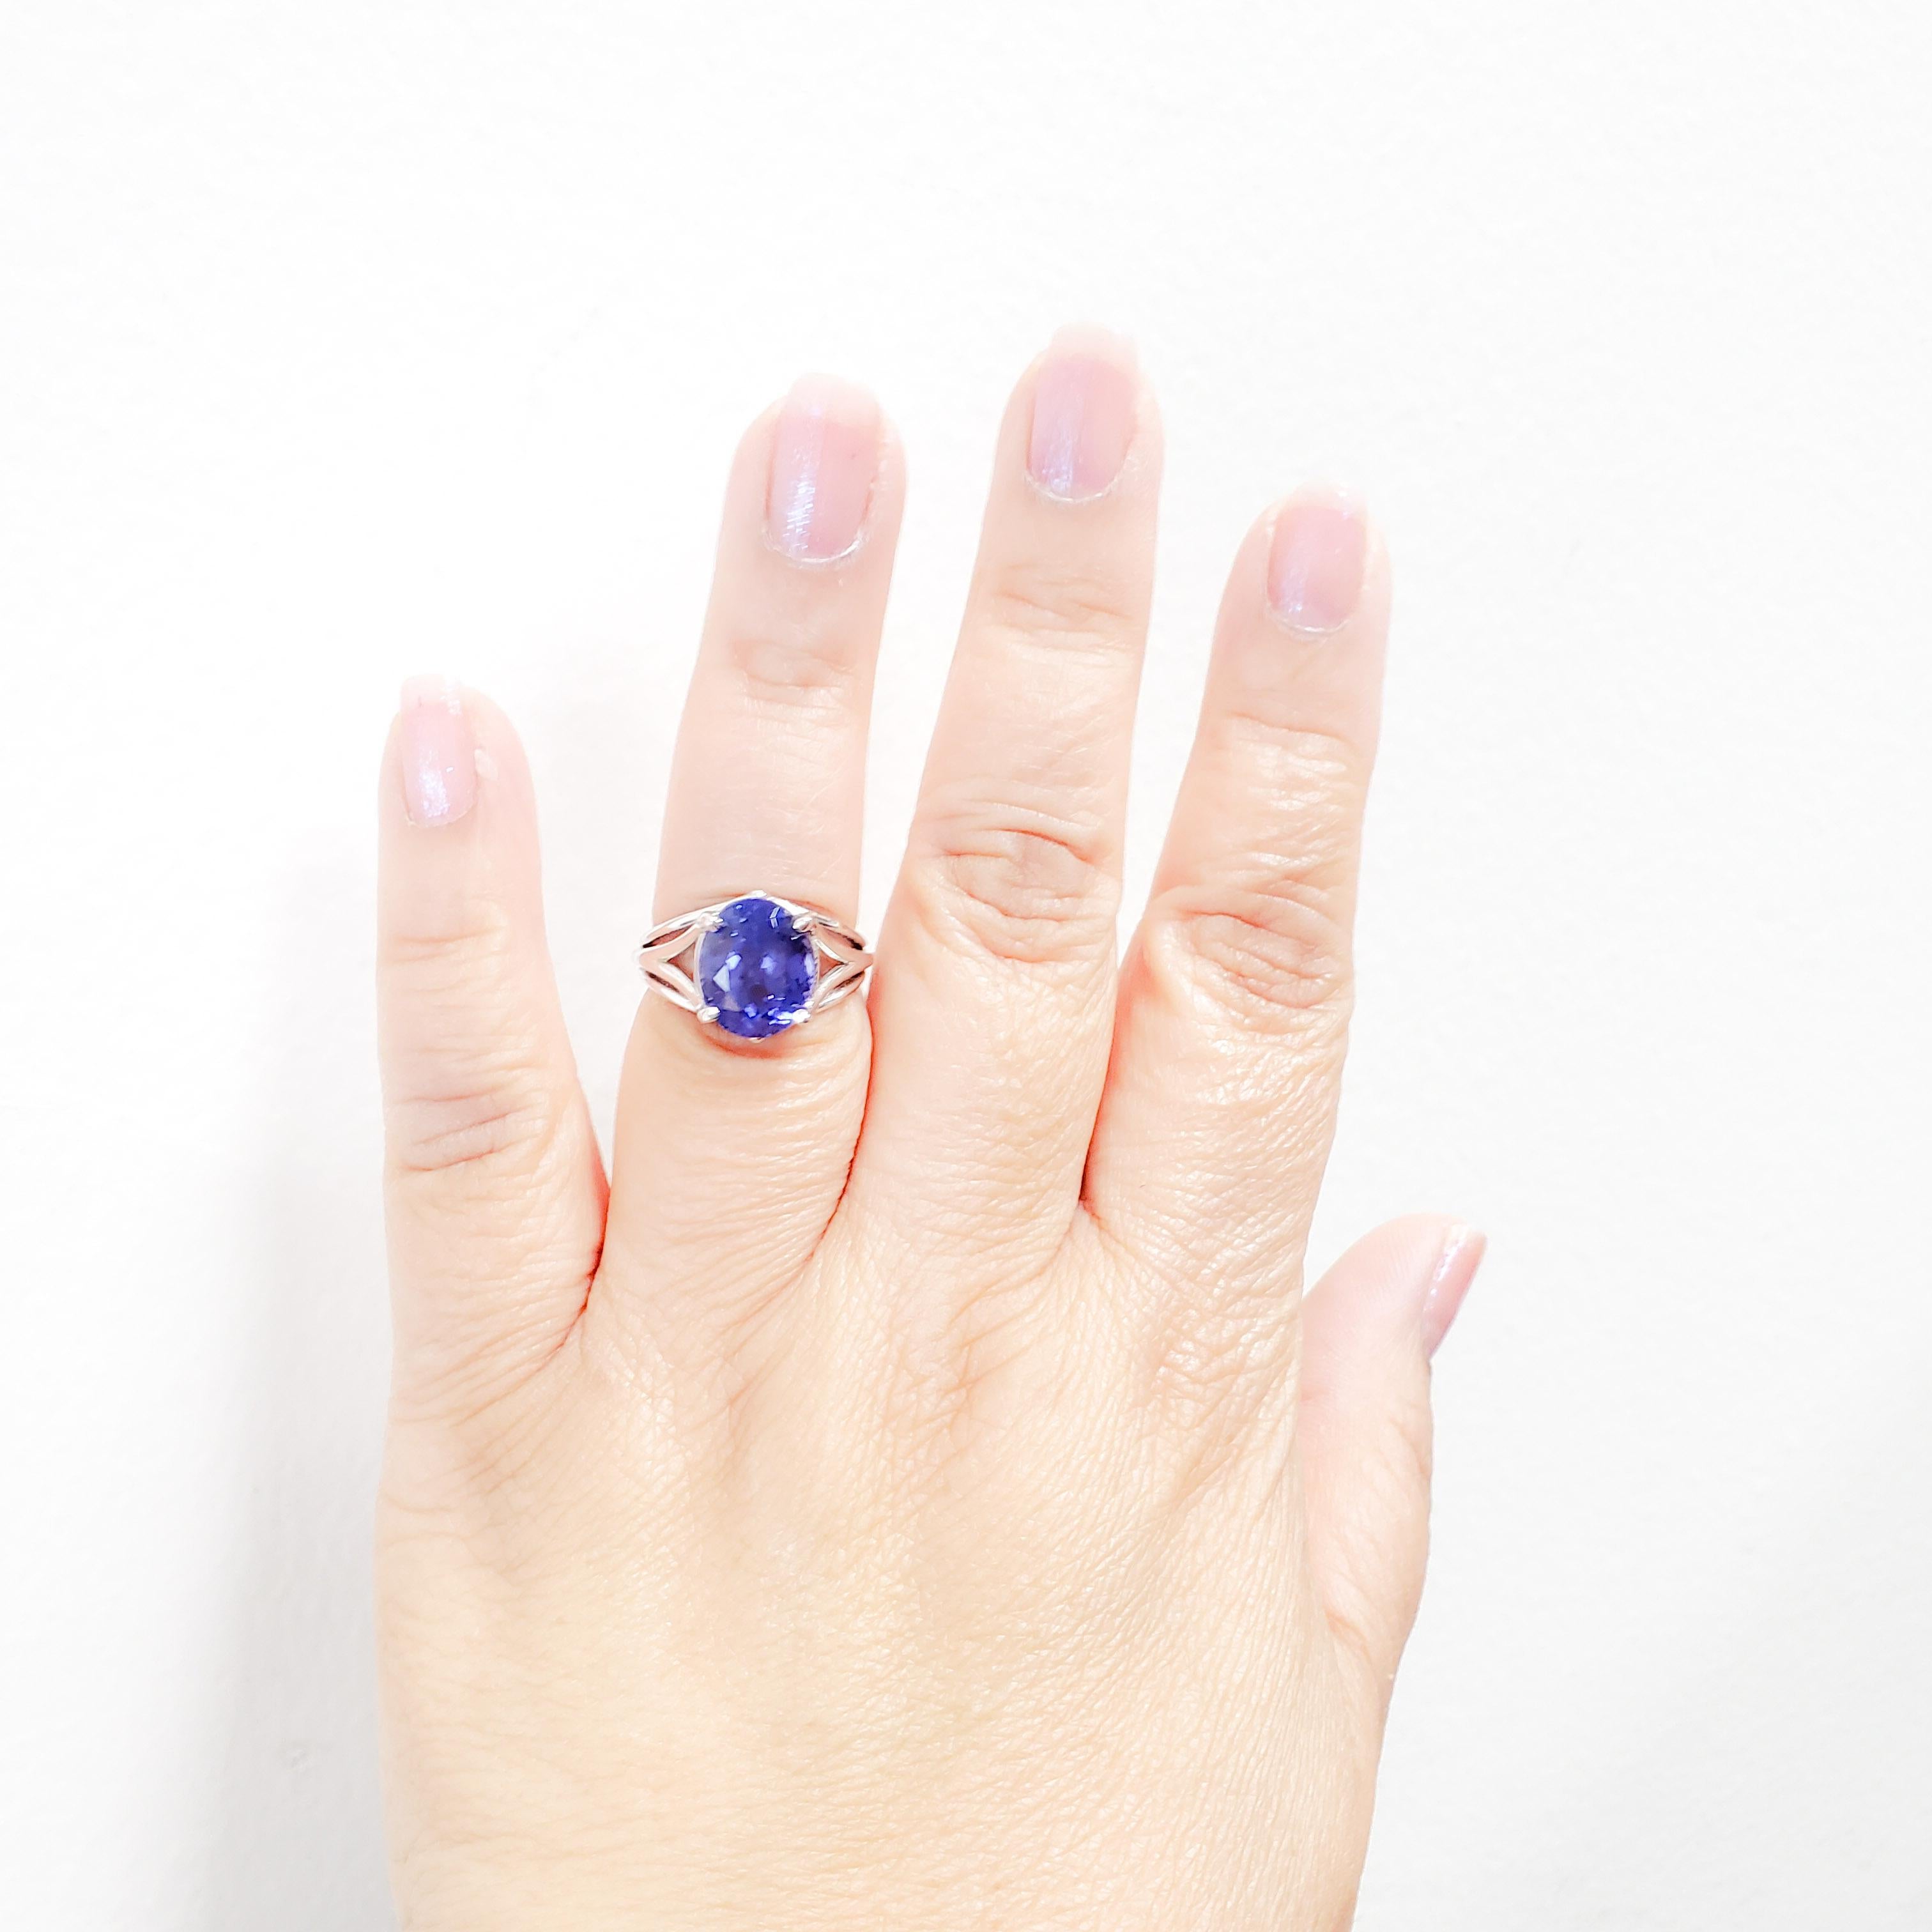 Beautiful tanzanite oval weighing 6.88 ct. in a handmade 14k white gold mounting.  Ring size 7.